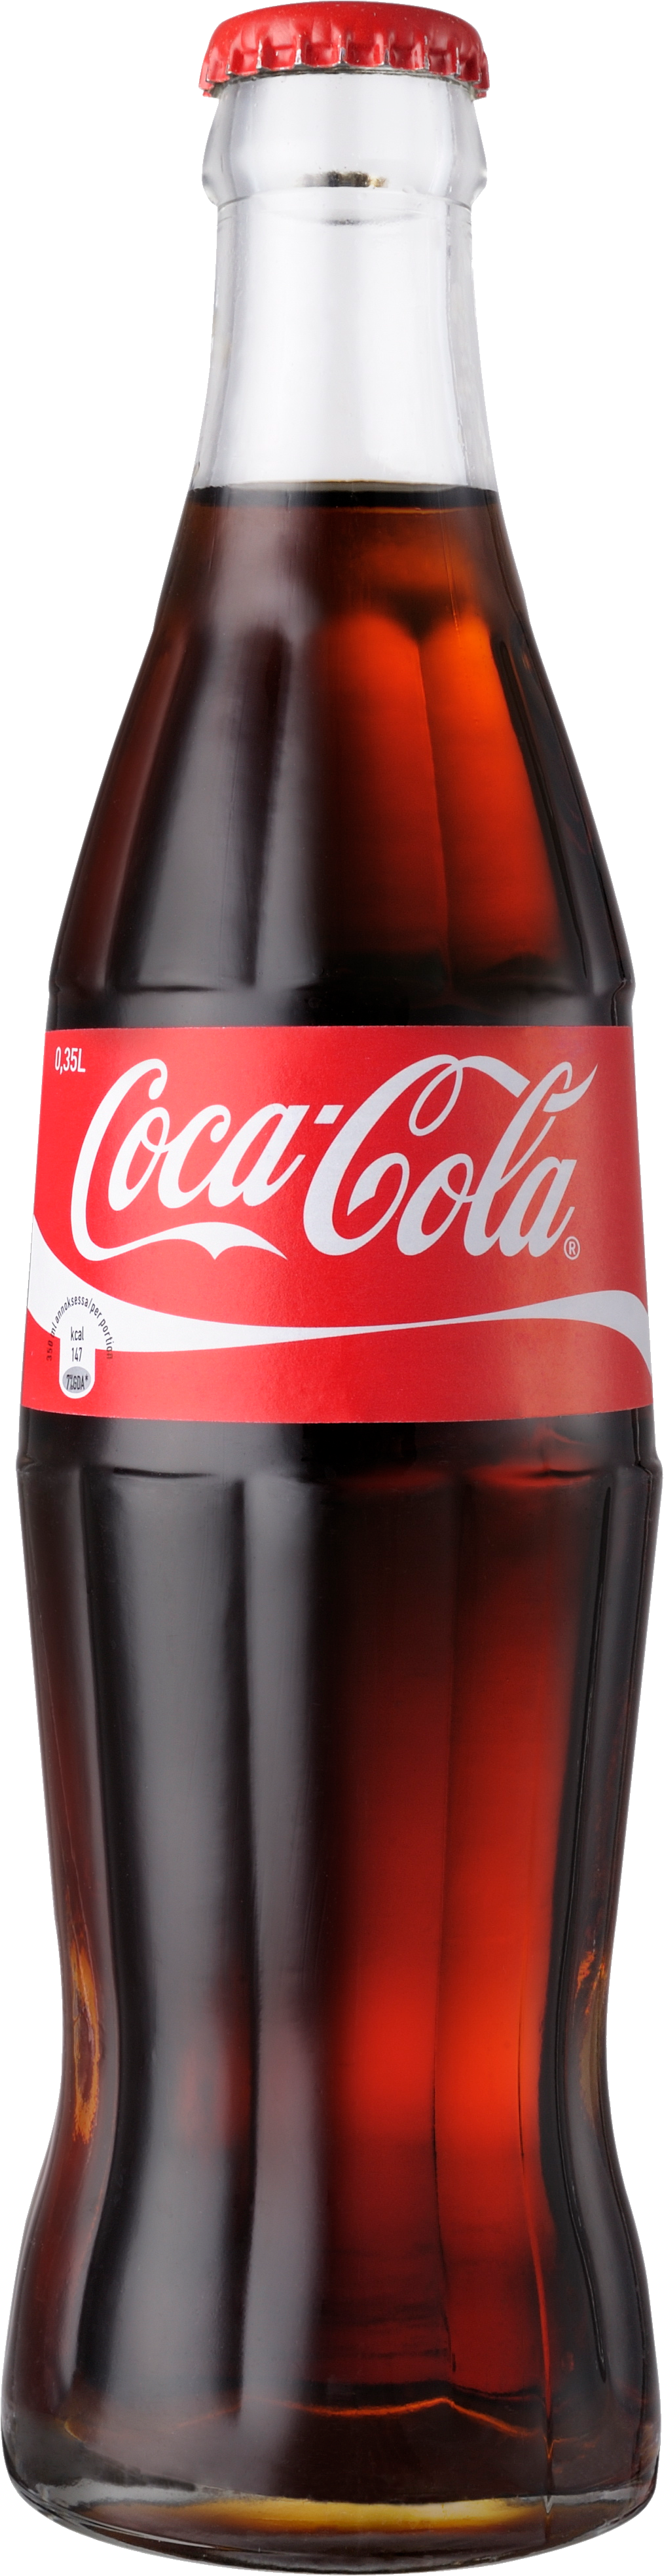 Cocacola PNG - 14536